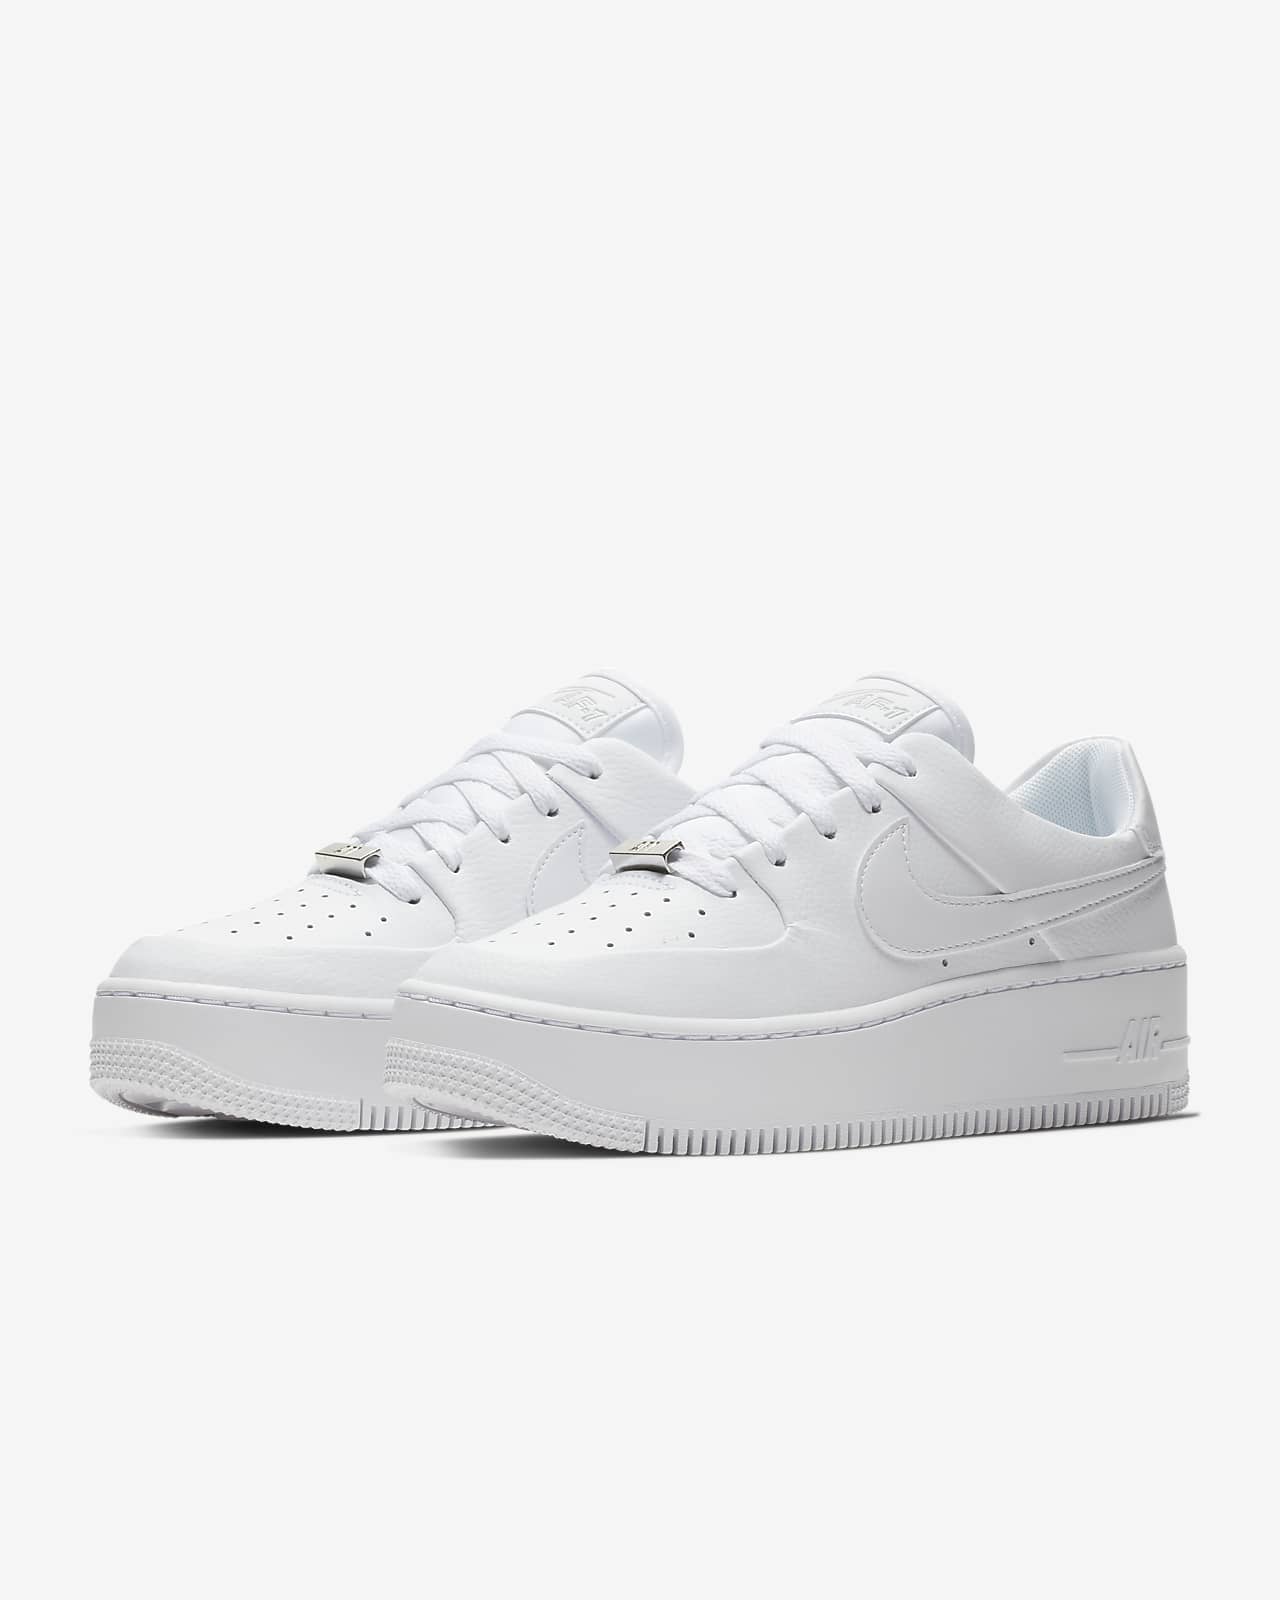 Nike Air Force 1 Sage Low Women's Shoes اسعار جوالات هواوي